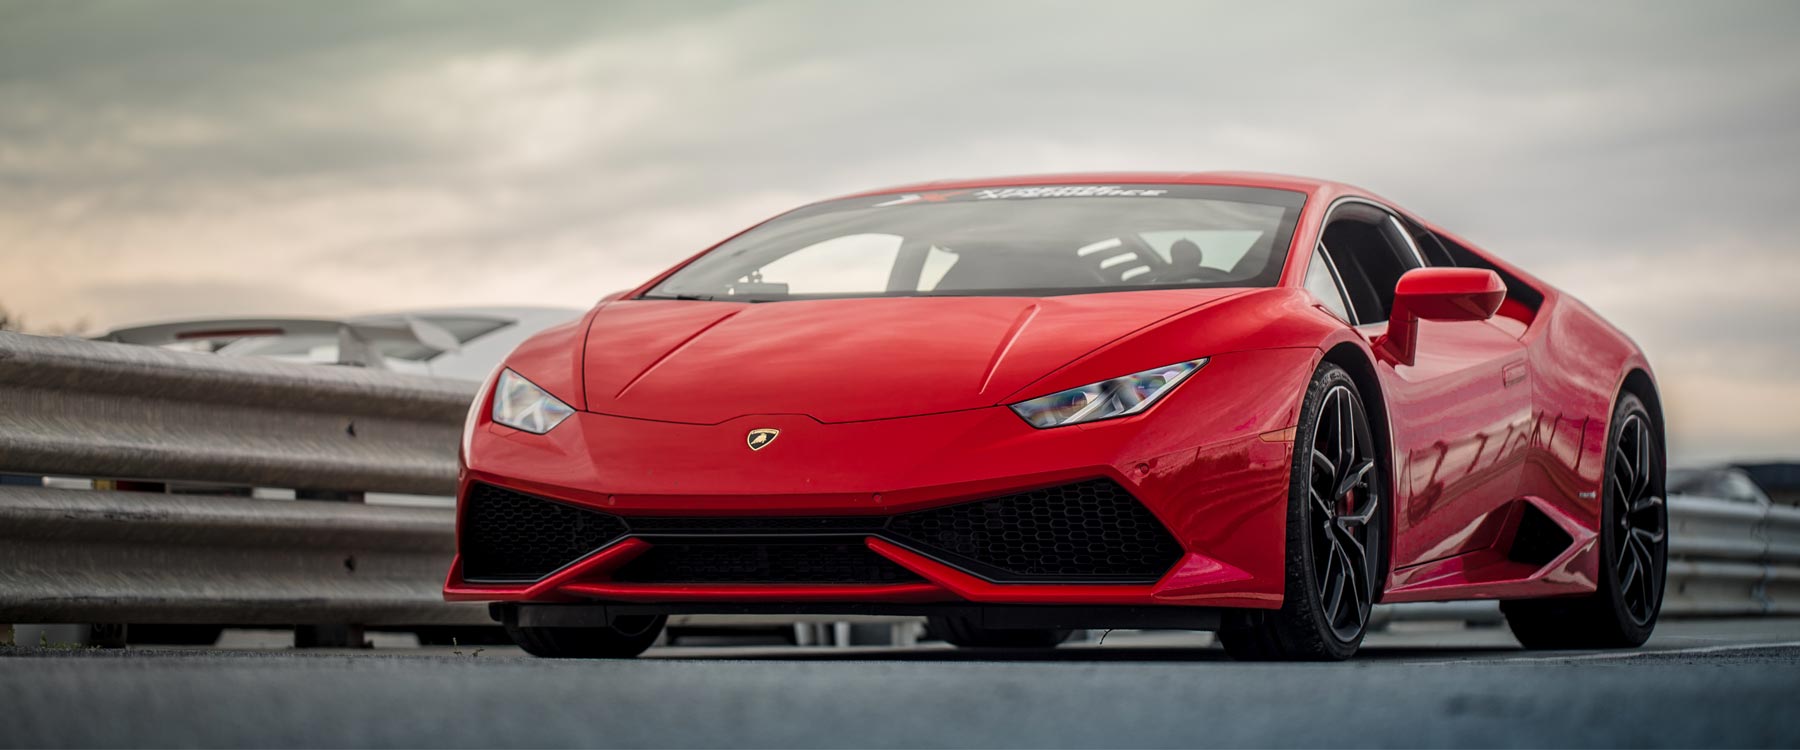 Photo of Xtreme Xperience Lamborghini Huracan in rosso mars, red at racetrack